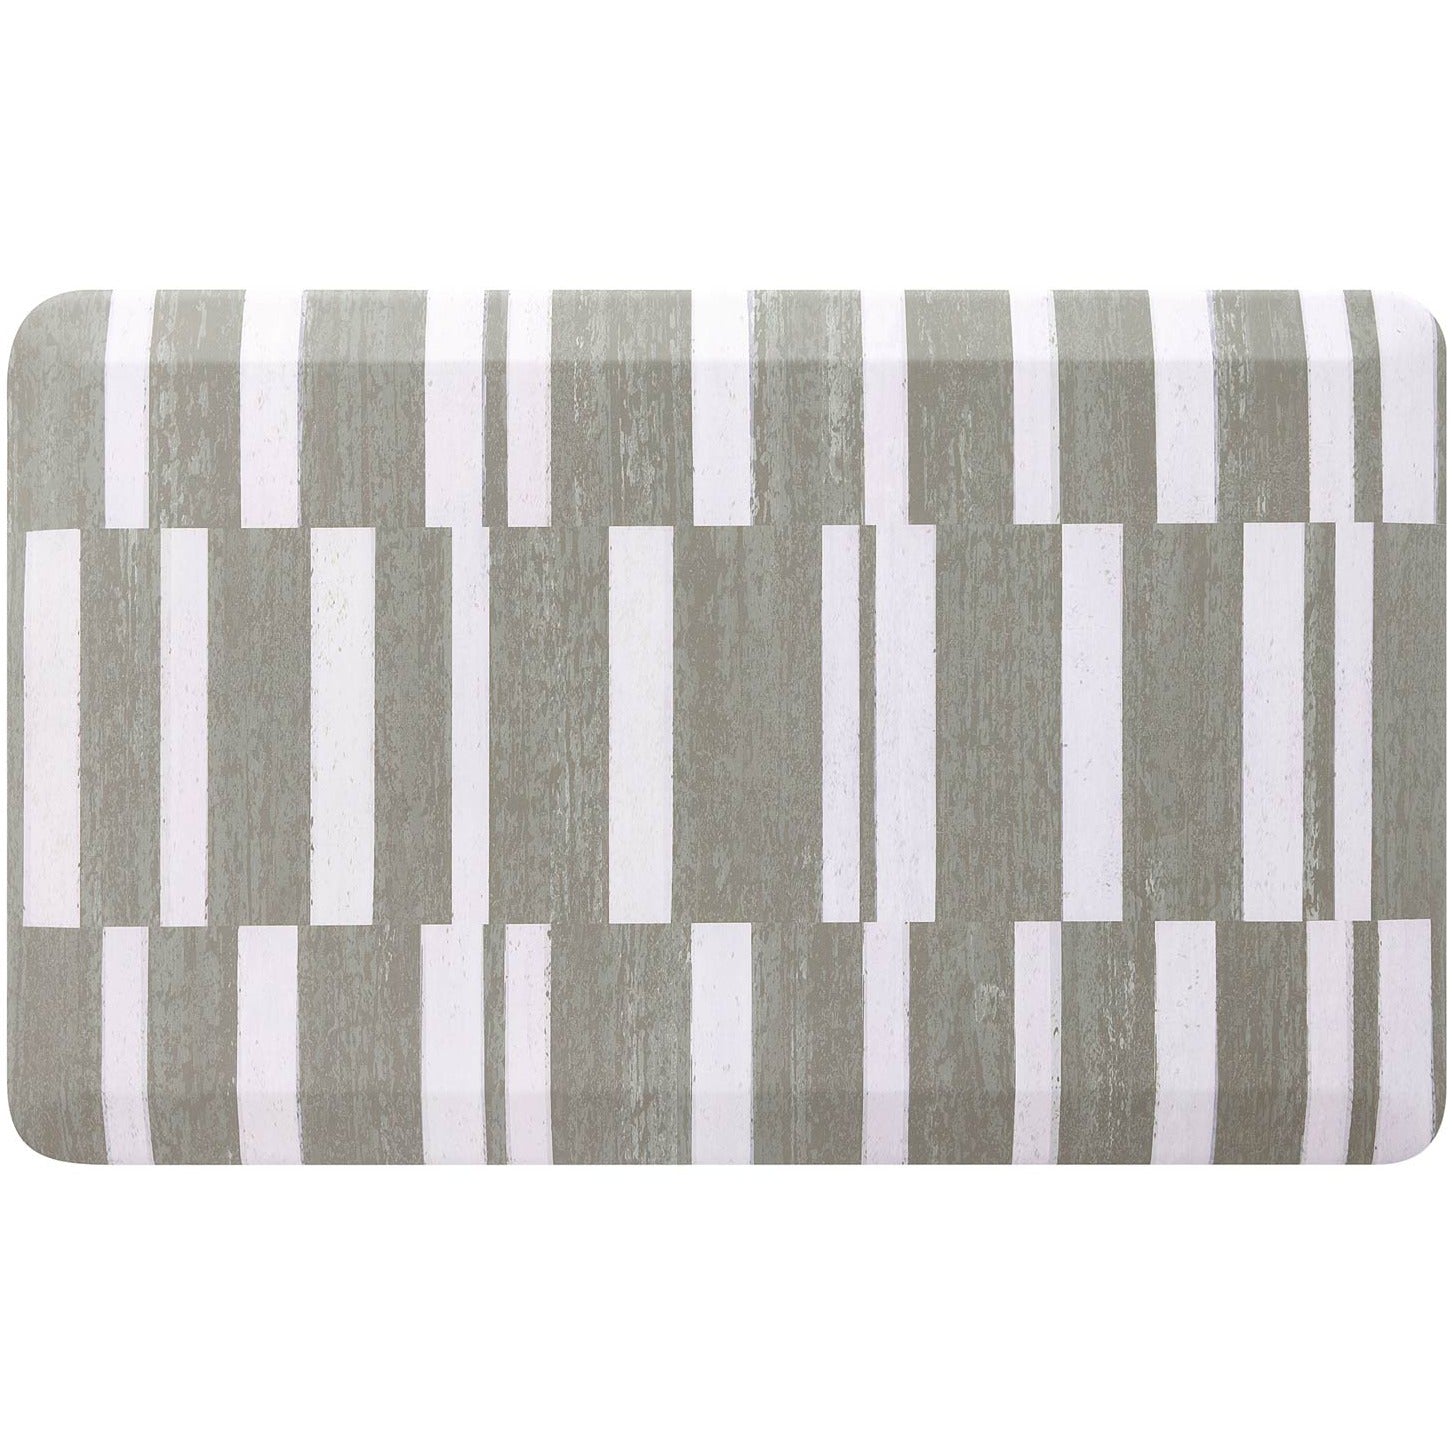 sutton stripe basil green and white inverted stripe standing mat shown in size 22x36